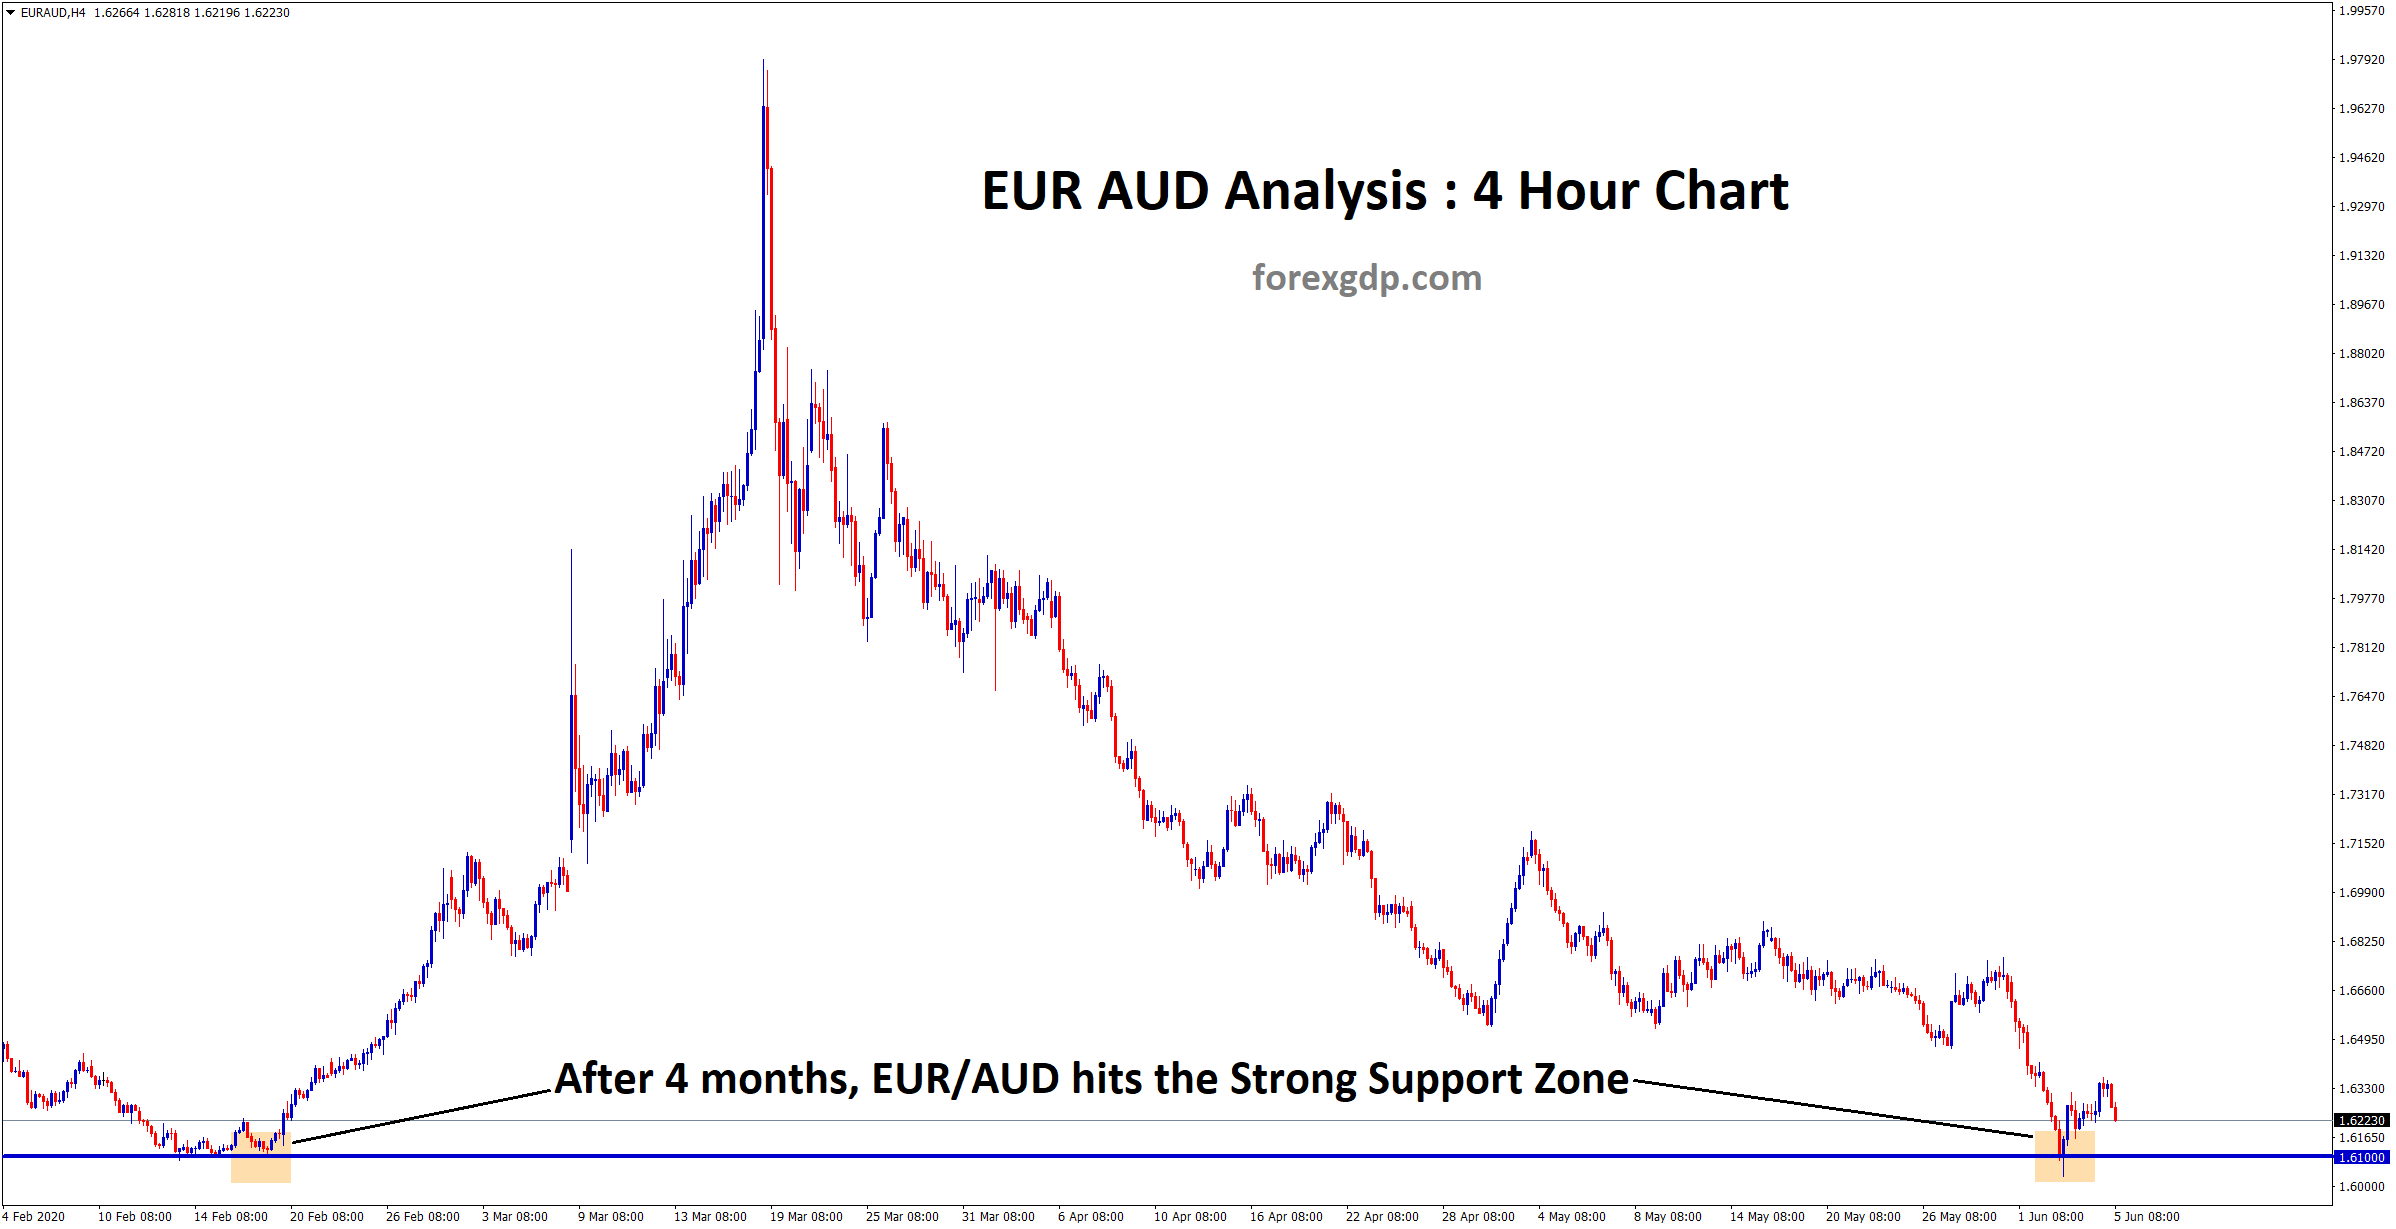 Strong Support zone price at EURAUD H4 chart